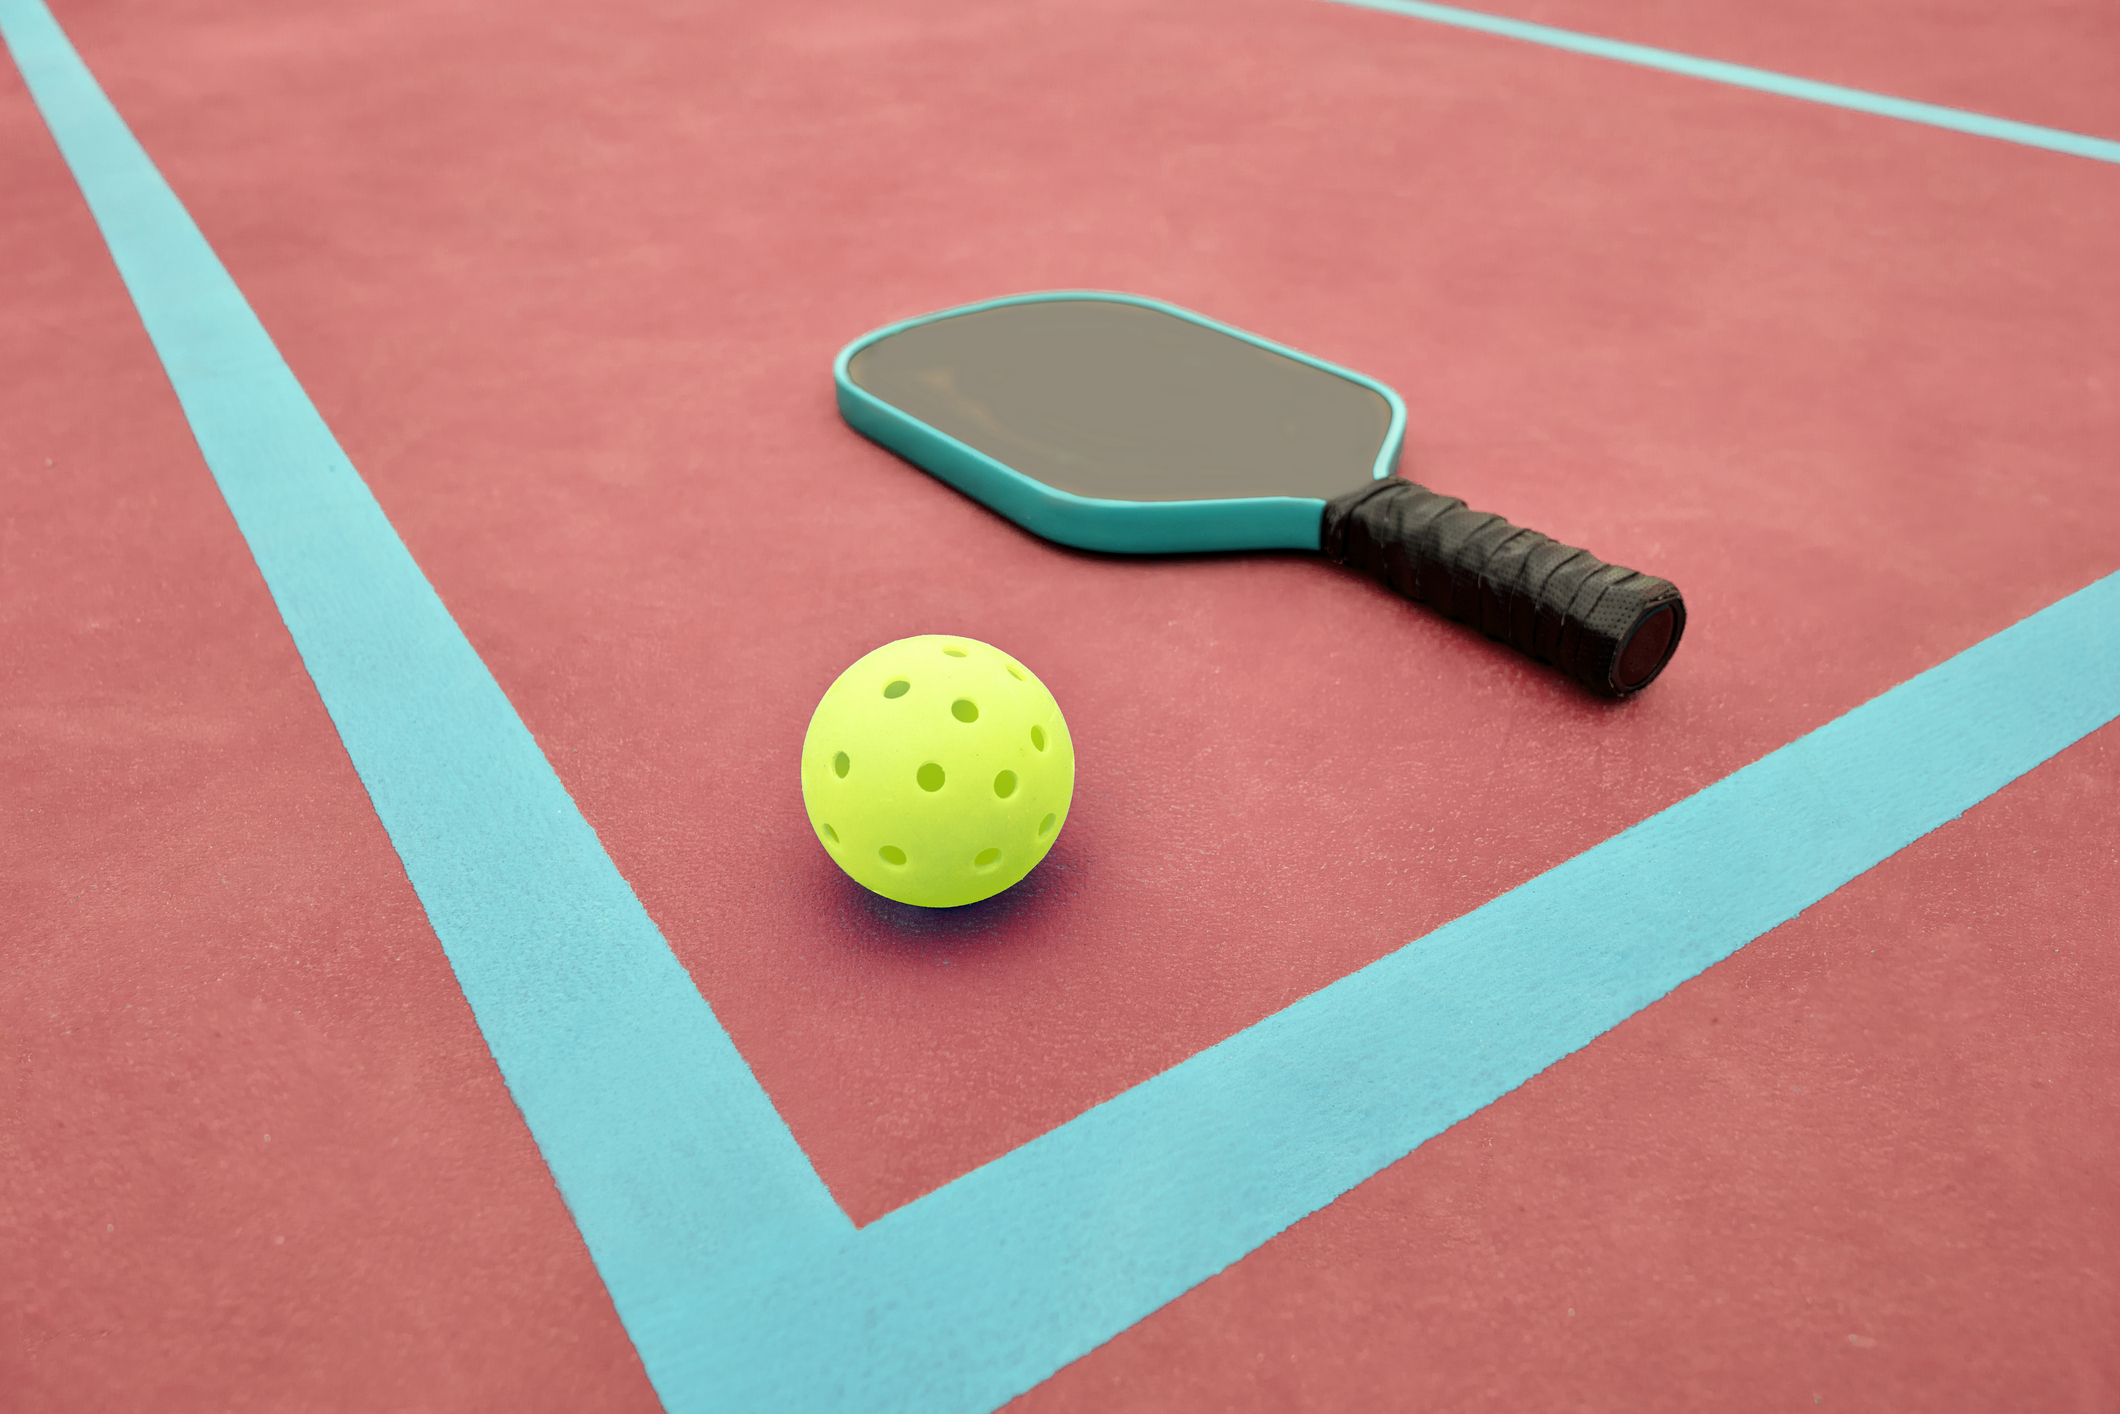 Pickleball curious? Here's what you need to get started - National